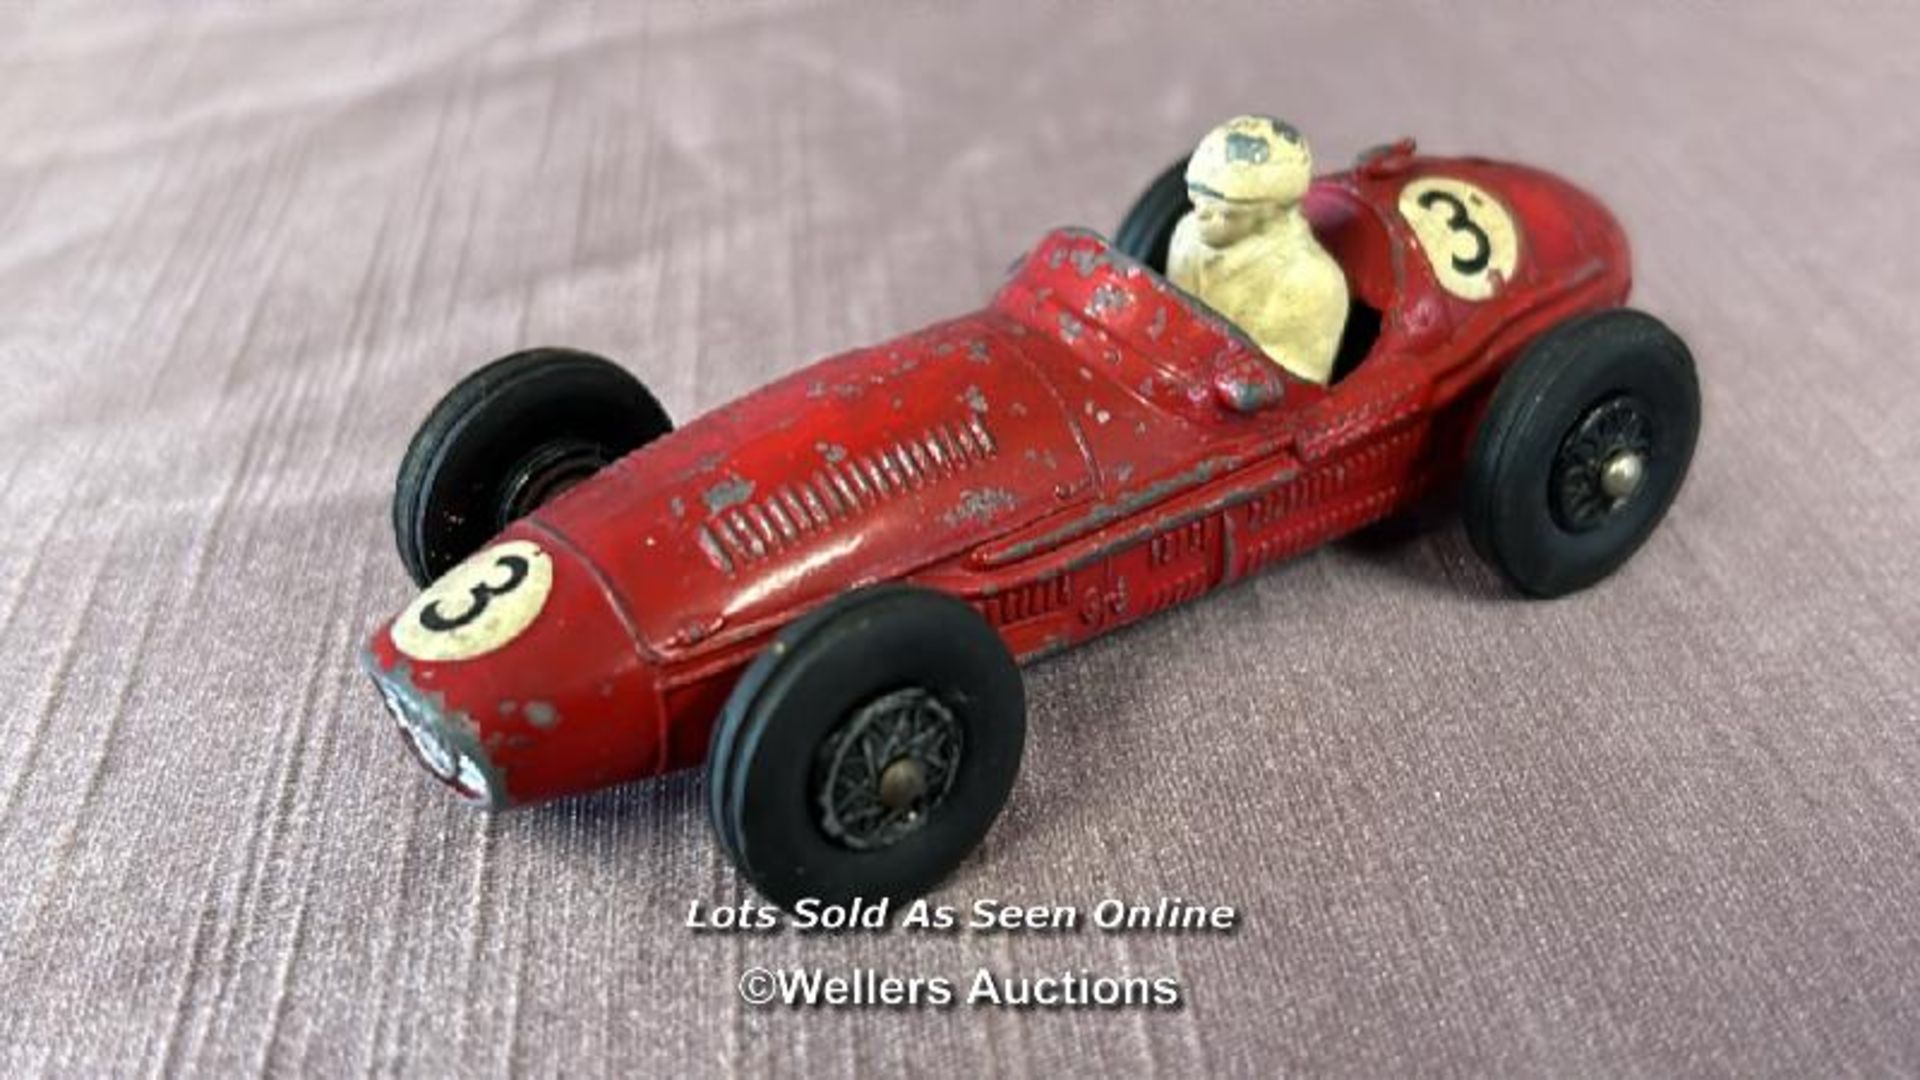 THREE DINKY DIE CAST RACING CARS INCLUDING MASERATI, COOPER BRISTOL AND GORDINI - Image 2 of 7